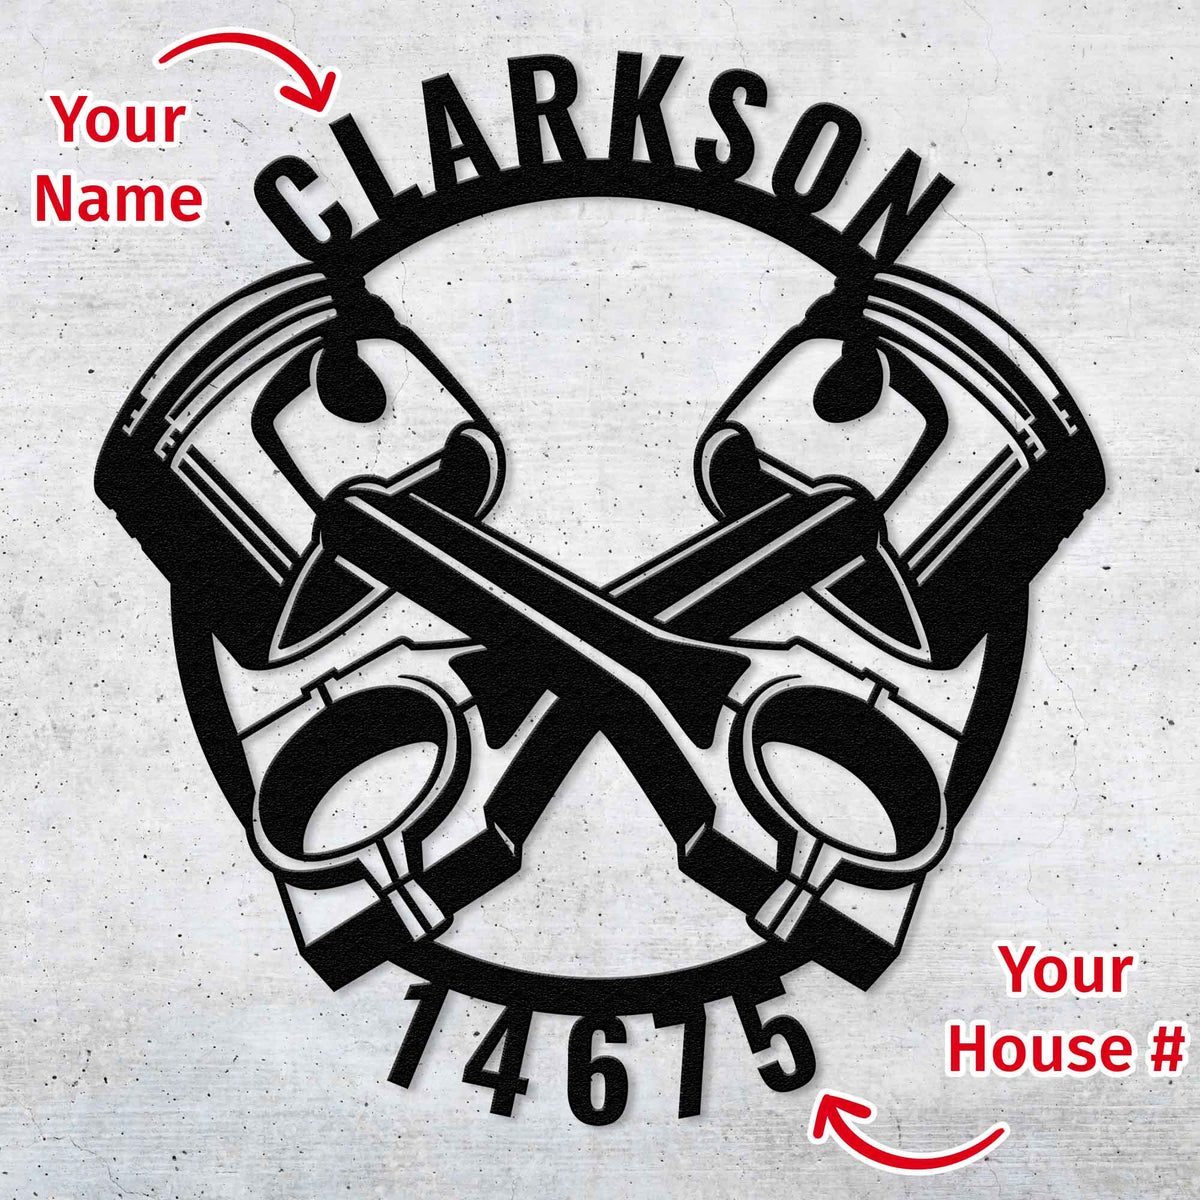 Cross Pistons - Personalized Metal Home Address Sign Wall Art - Throttle Mania